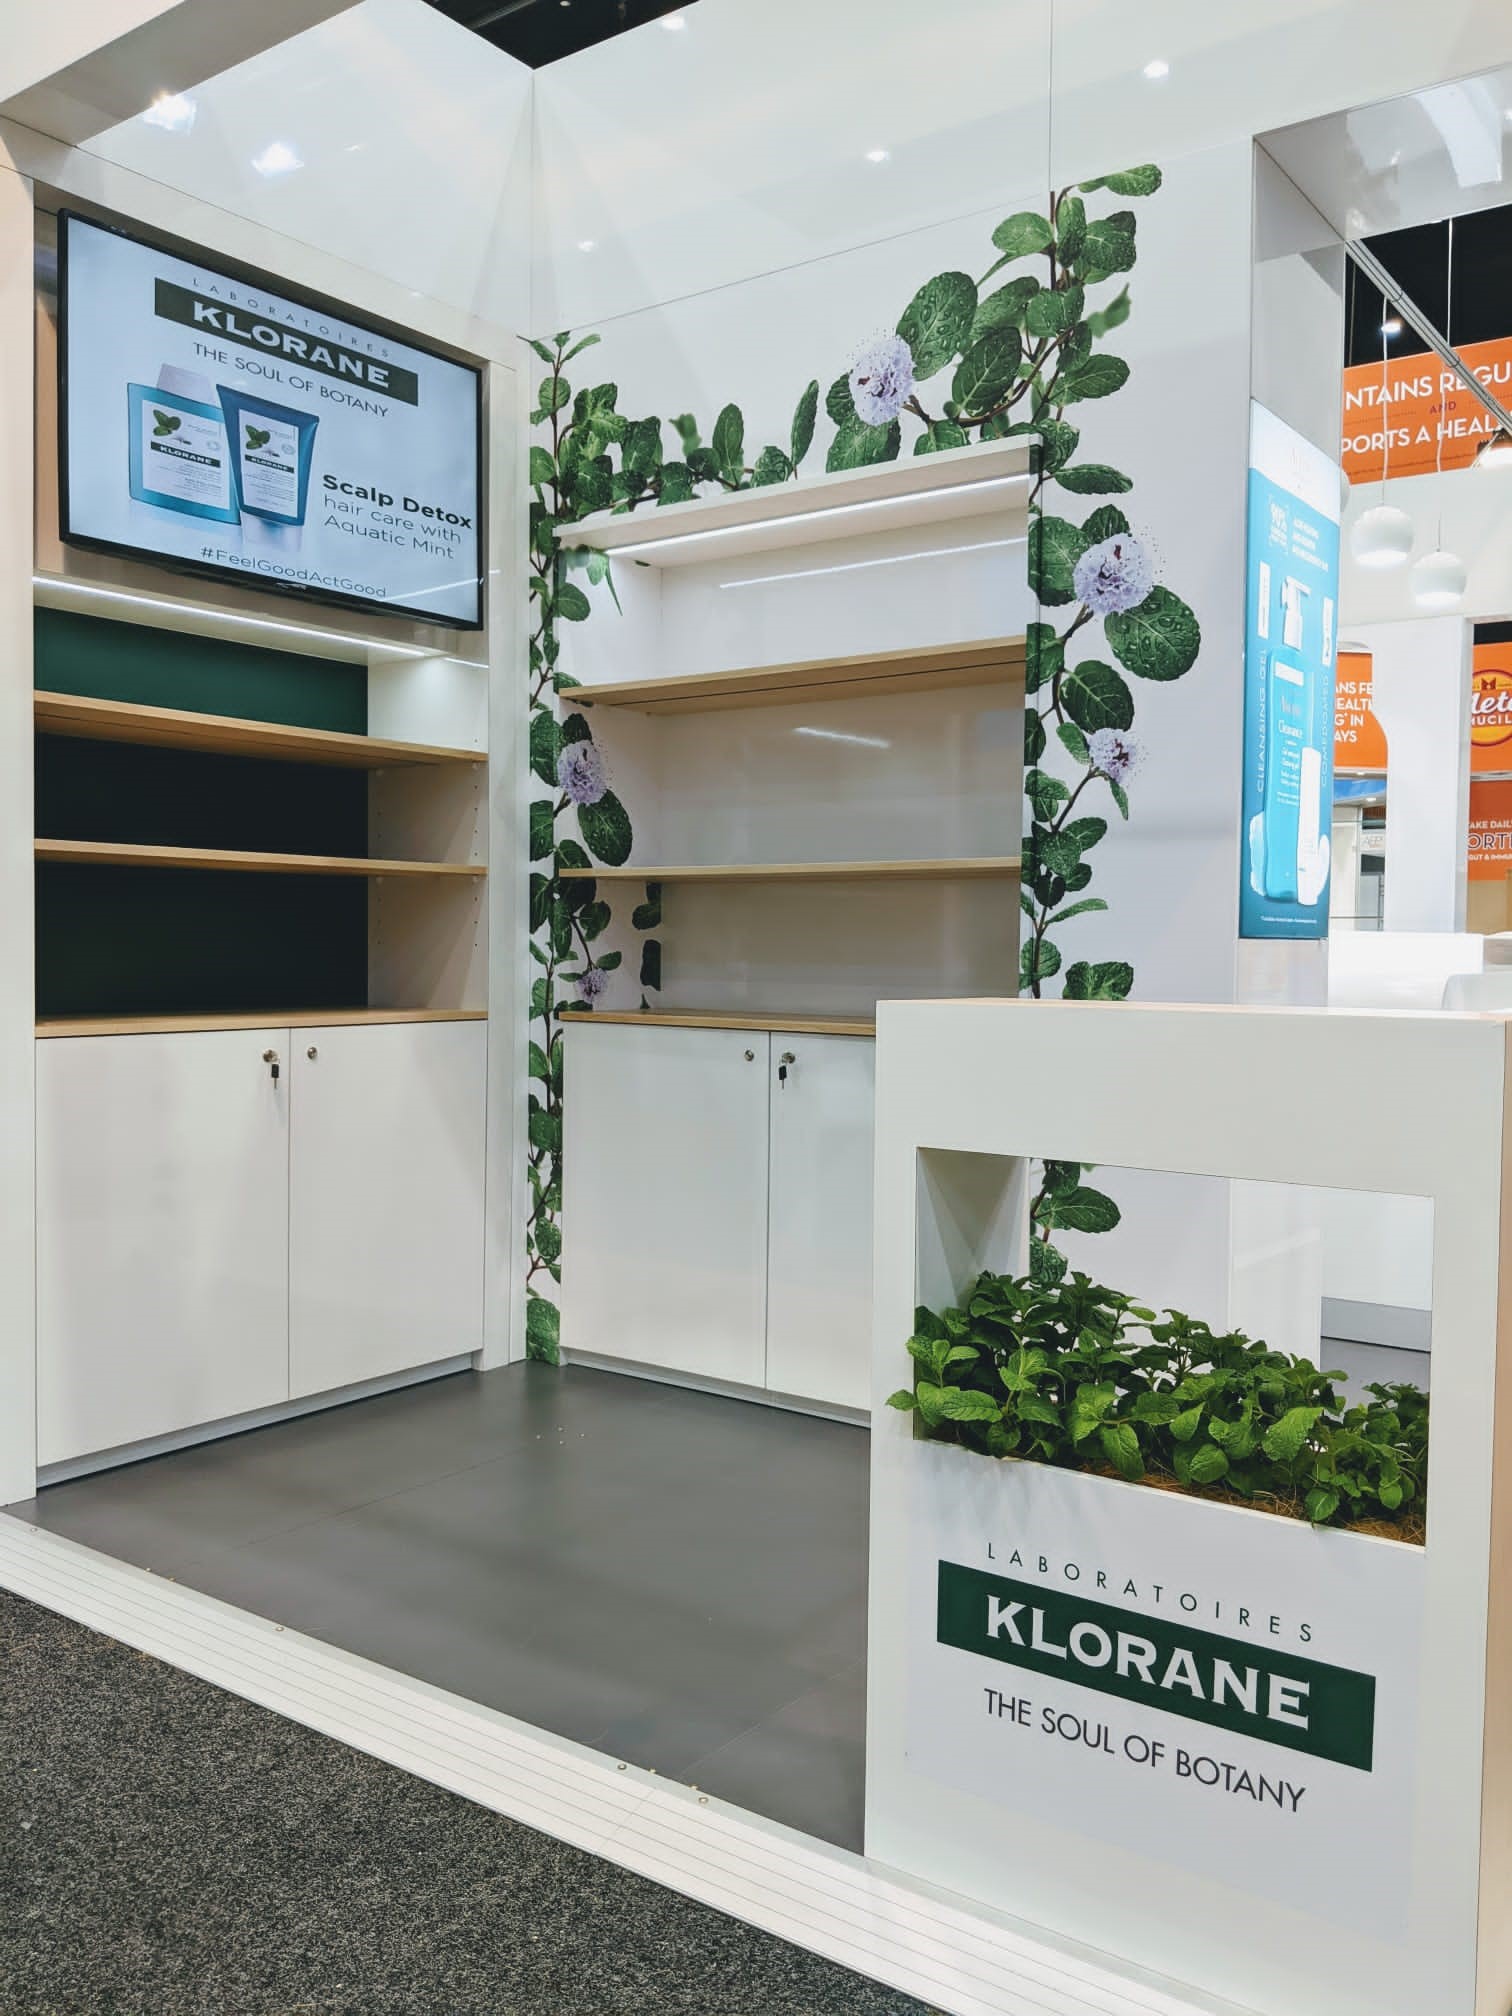 Klorane stand with television turned on showing feature 'Scalp Detox' products and shelves surrounded by green vinery wallpaper with white flowers